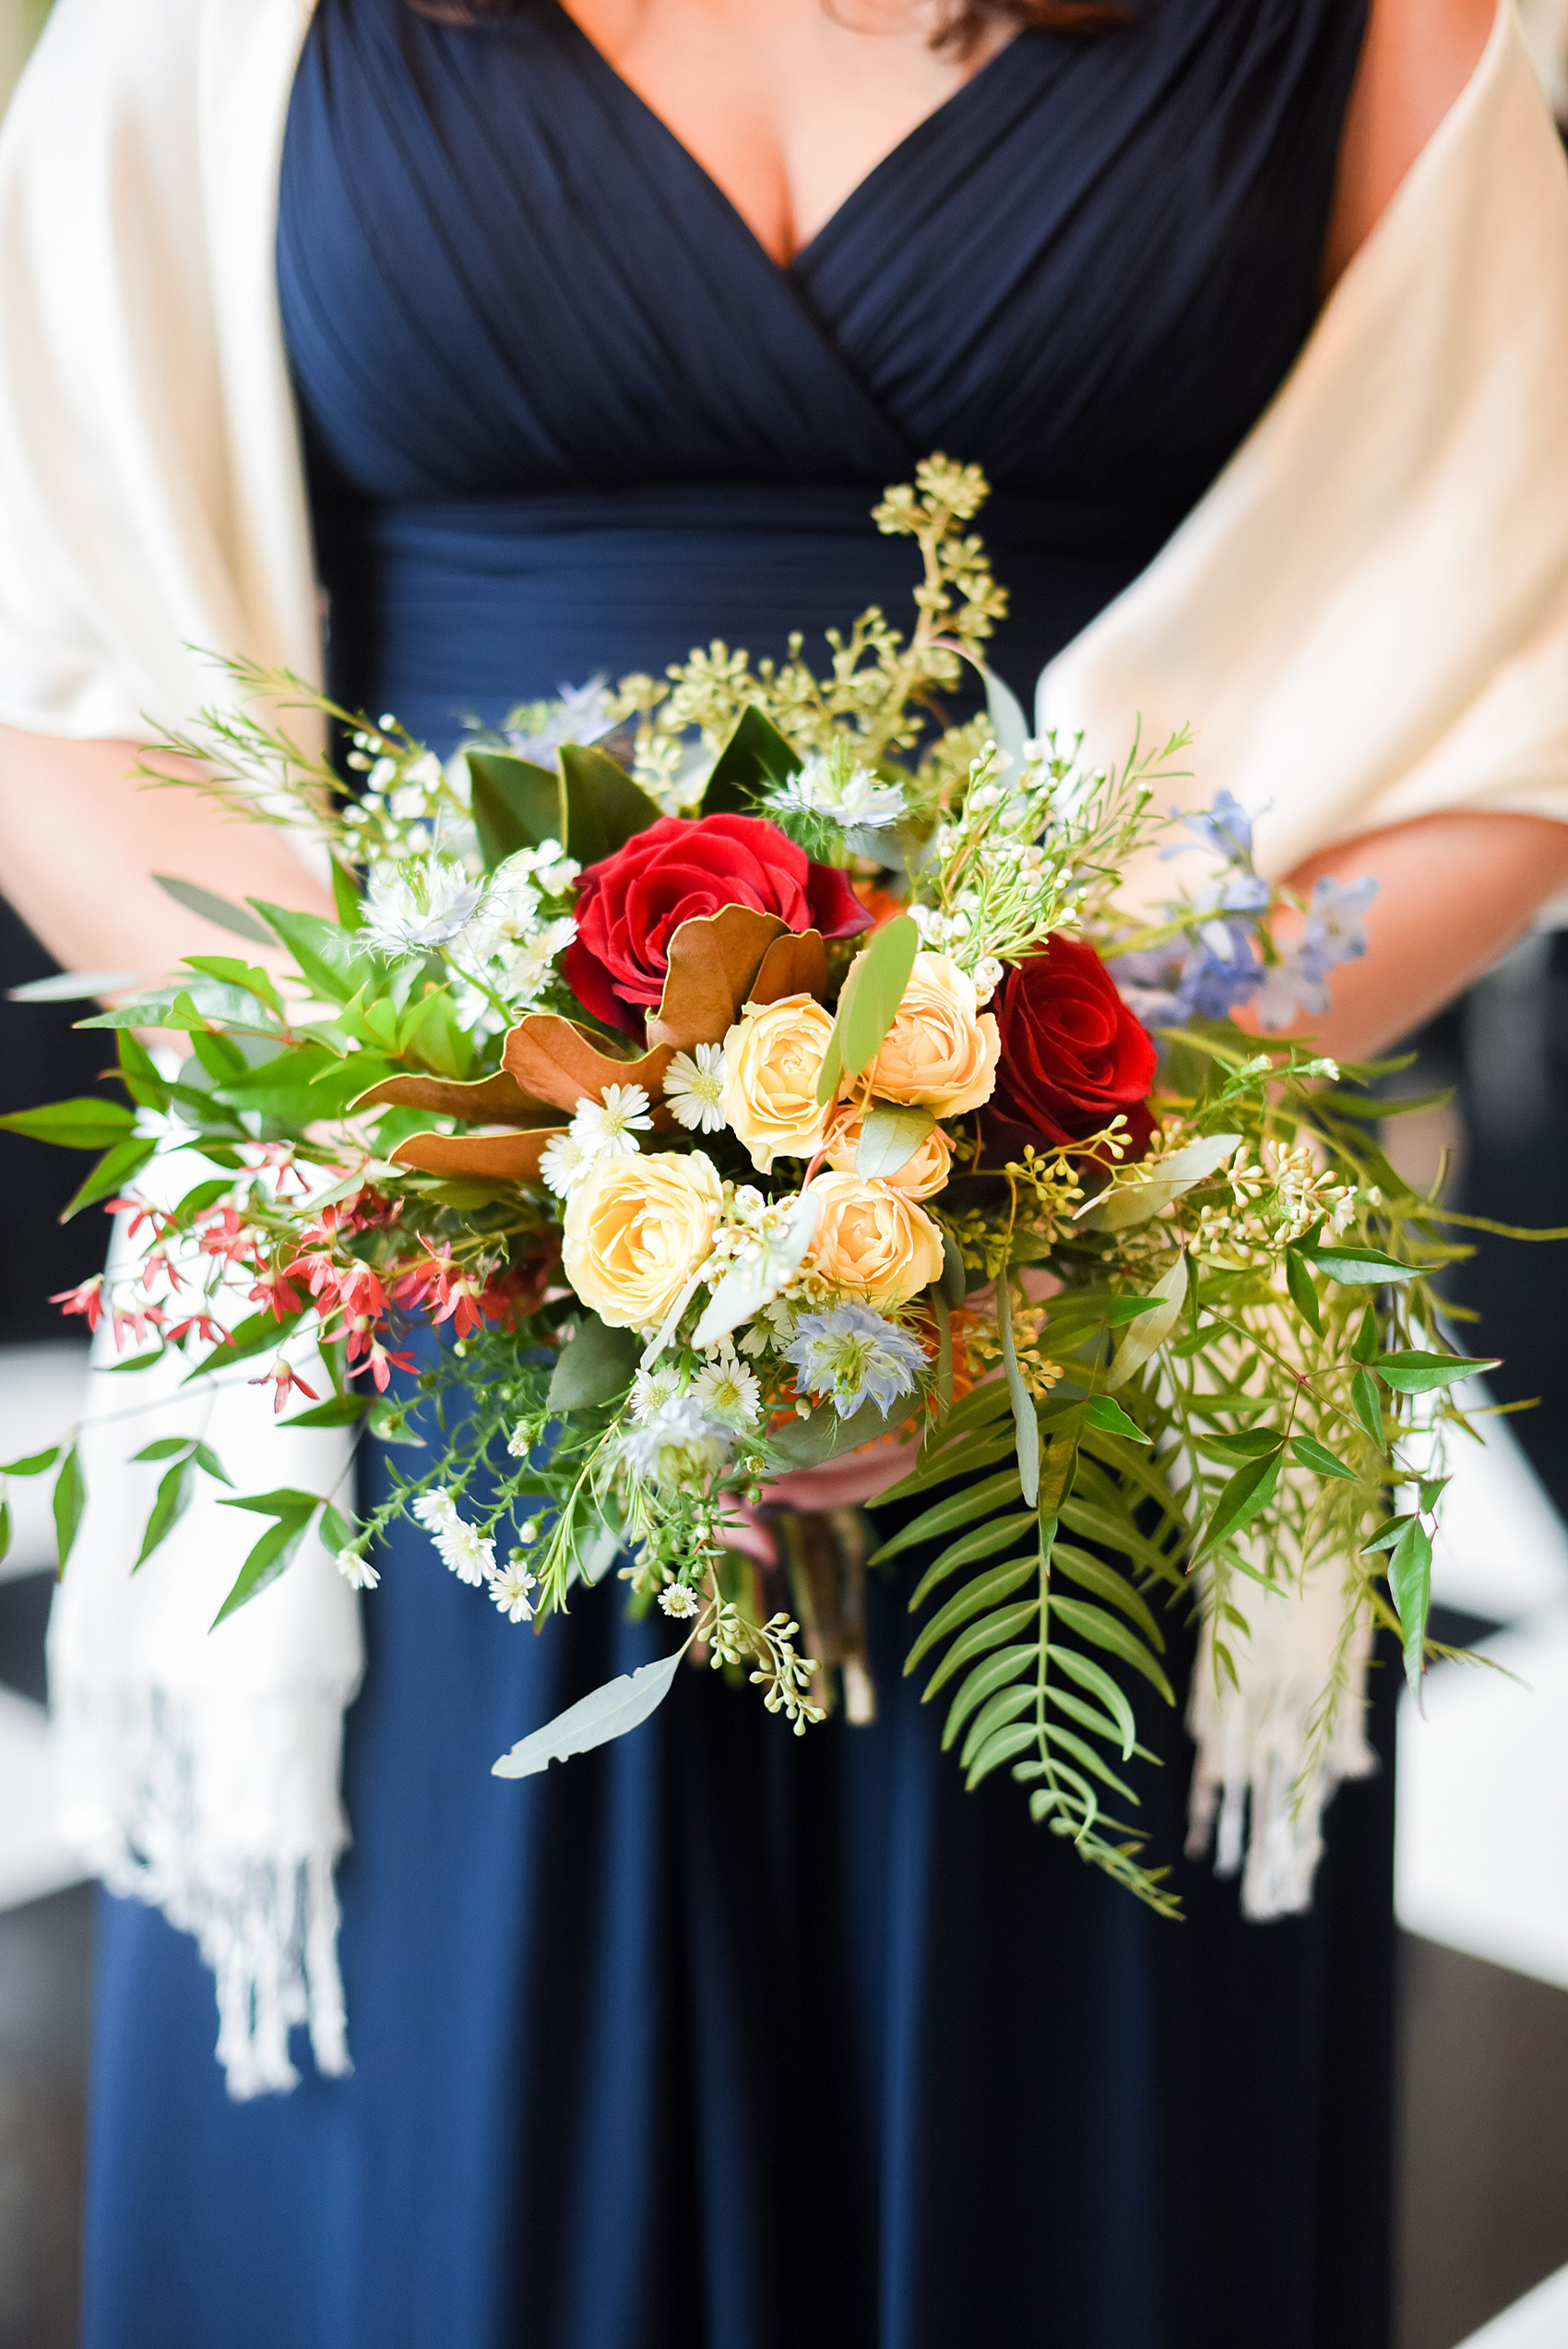 Beautiful wedding photos at The Carolina Inn at Chapel Hill, North Carolina by Mikkel Paige Photography. Picture of the bridesmaids bouquets, complete with green ferns, red roses, kangaroo paw, yellow spray roses and blue accents by English Garden. Click through to see the rest of this gorgeous winter wedding! #thecarolinainn #snowywedding